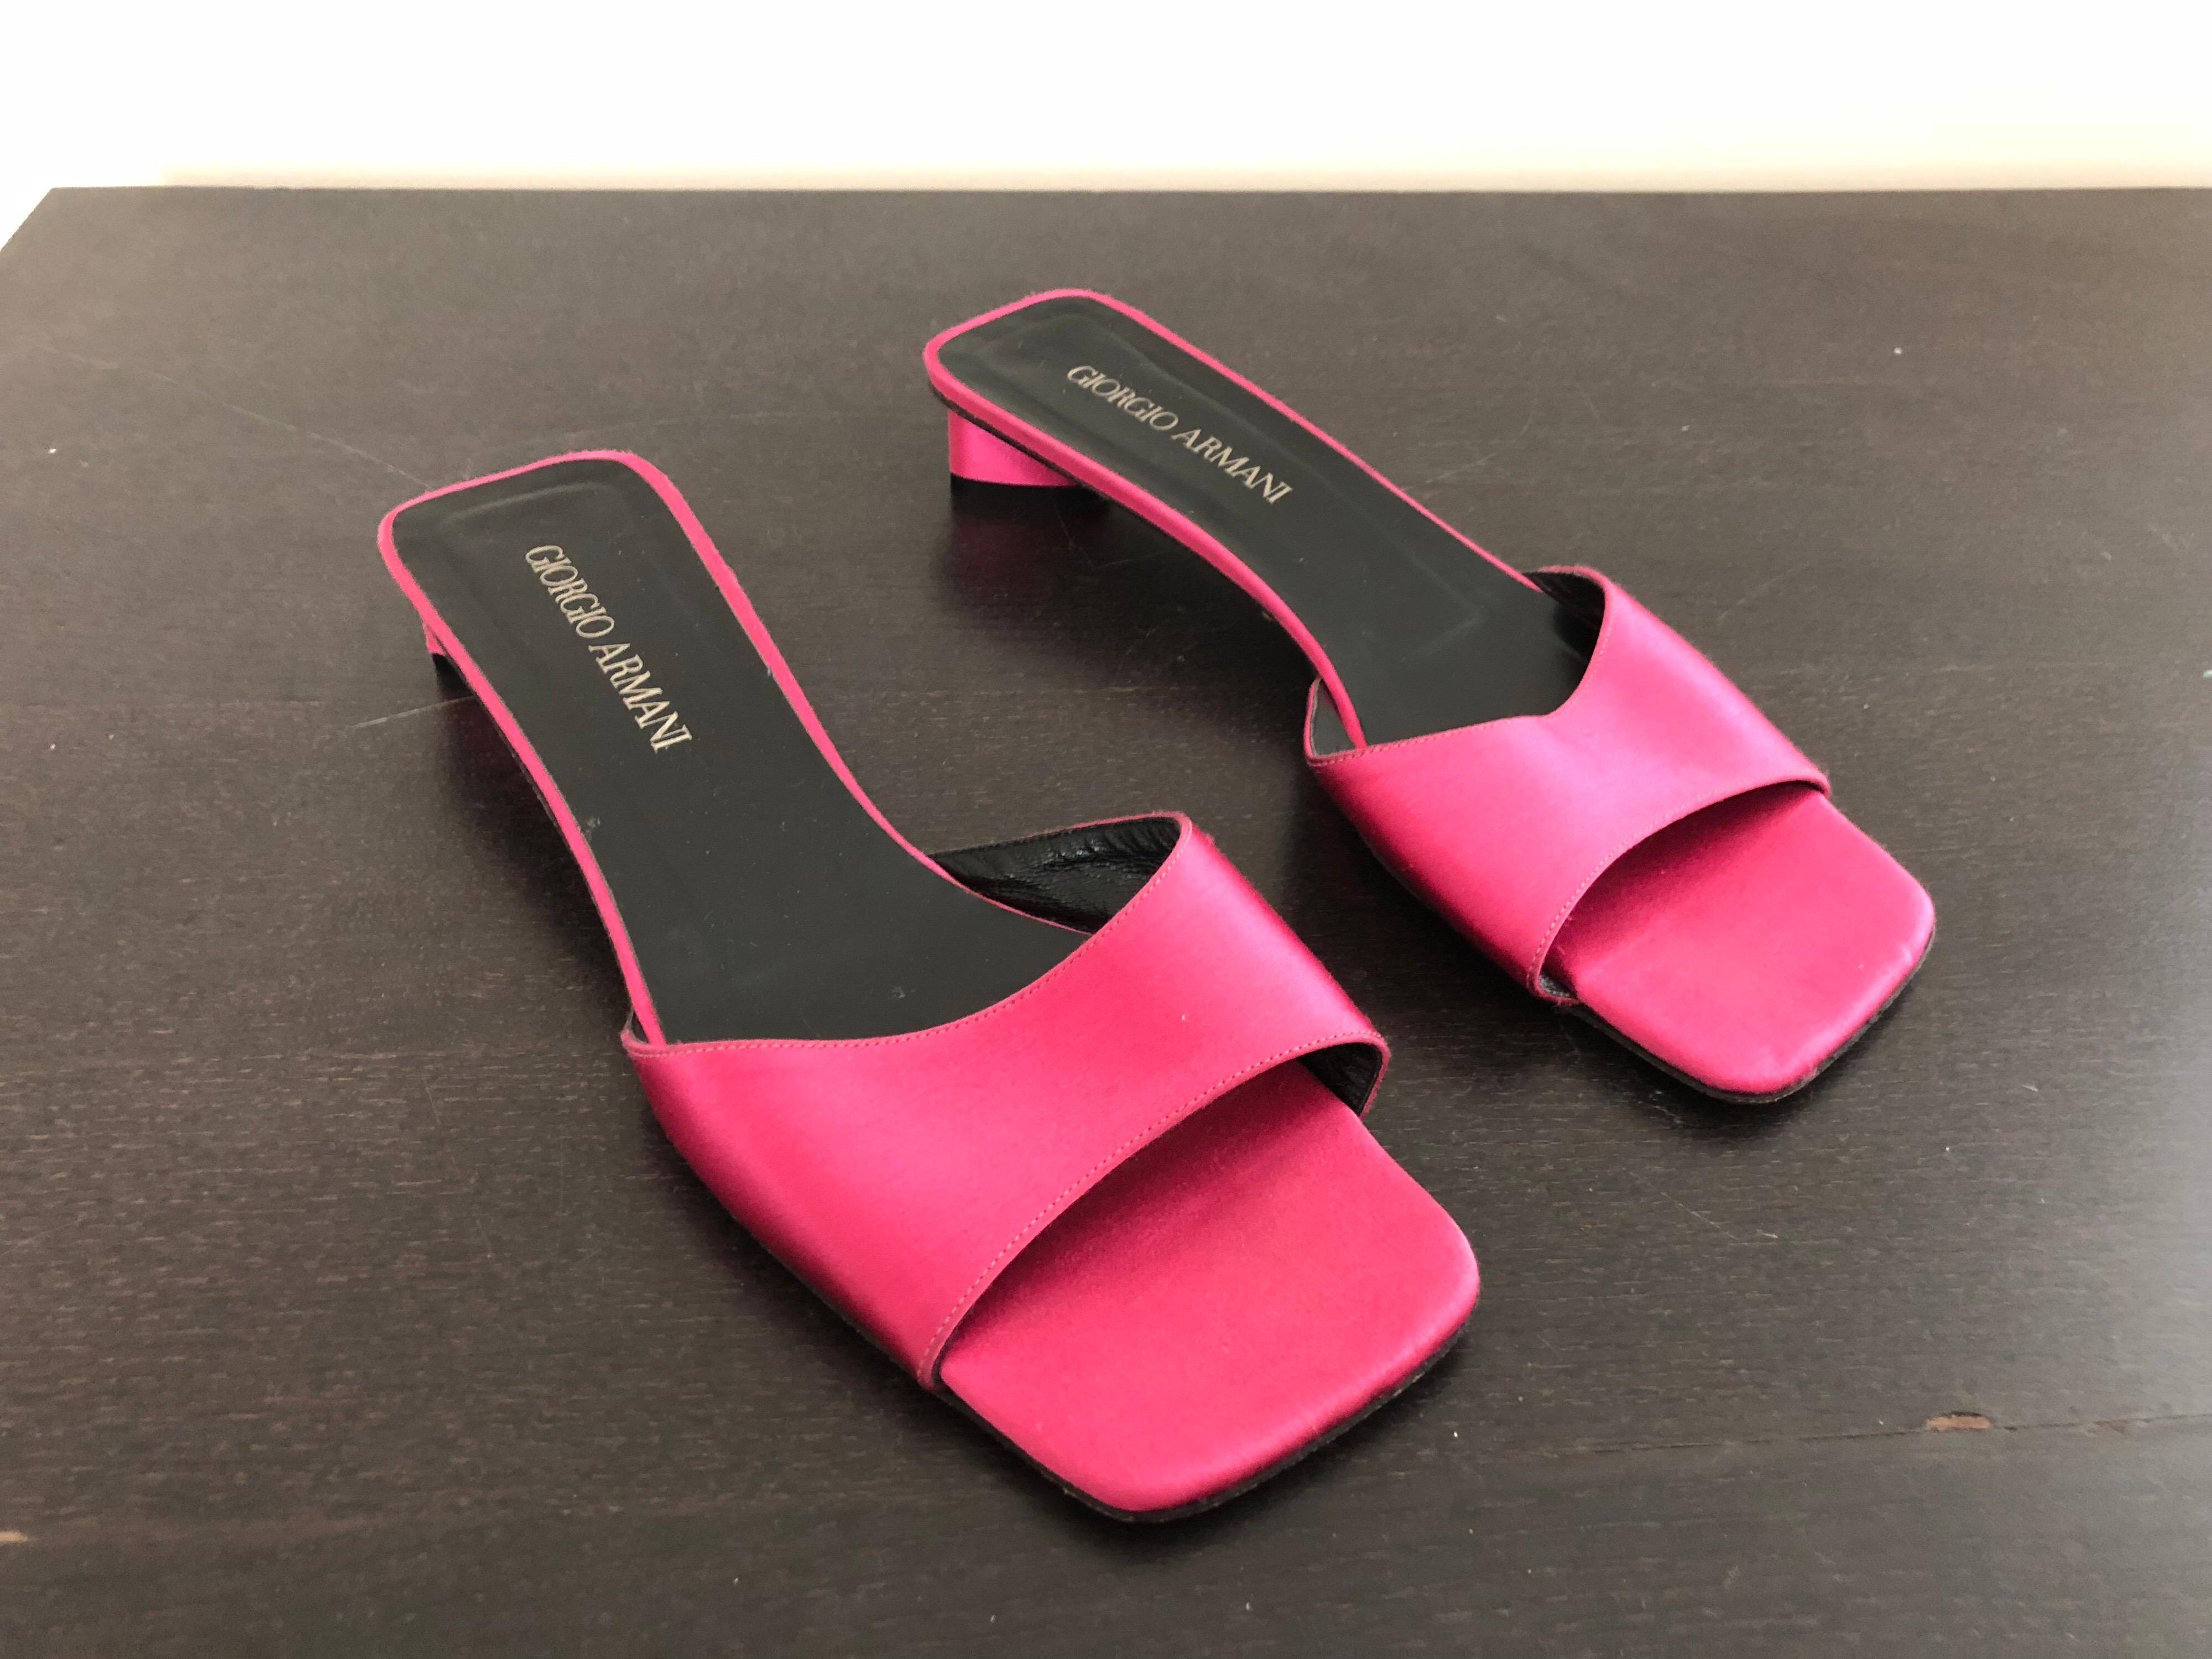 Sensible without sacrificing style! These vintage GIORGIO ARMANI hot pink silk satin kitten heel sandals are so chic! Vibrant pink color with a low heel. Never been worn. Great with jeans, a skirt, shorts or a dress. In great condition. Made in